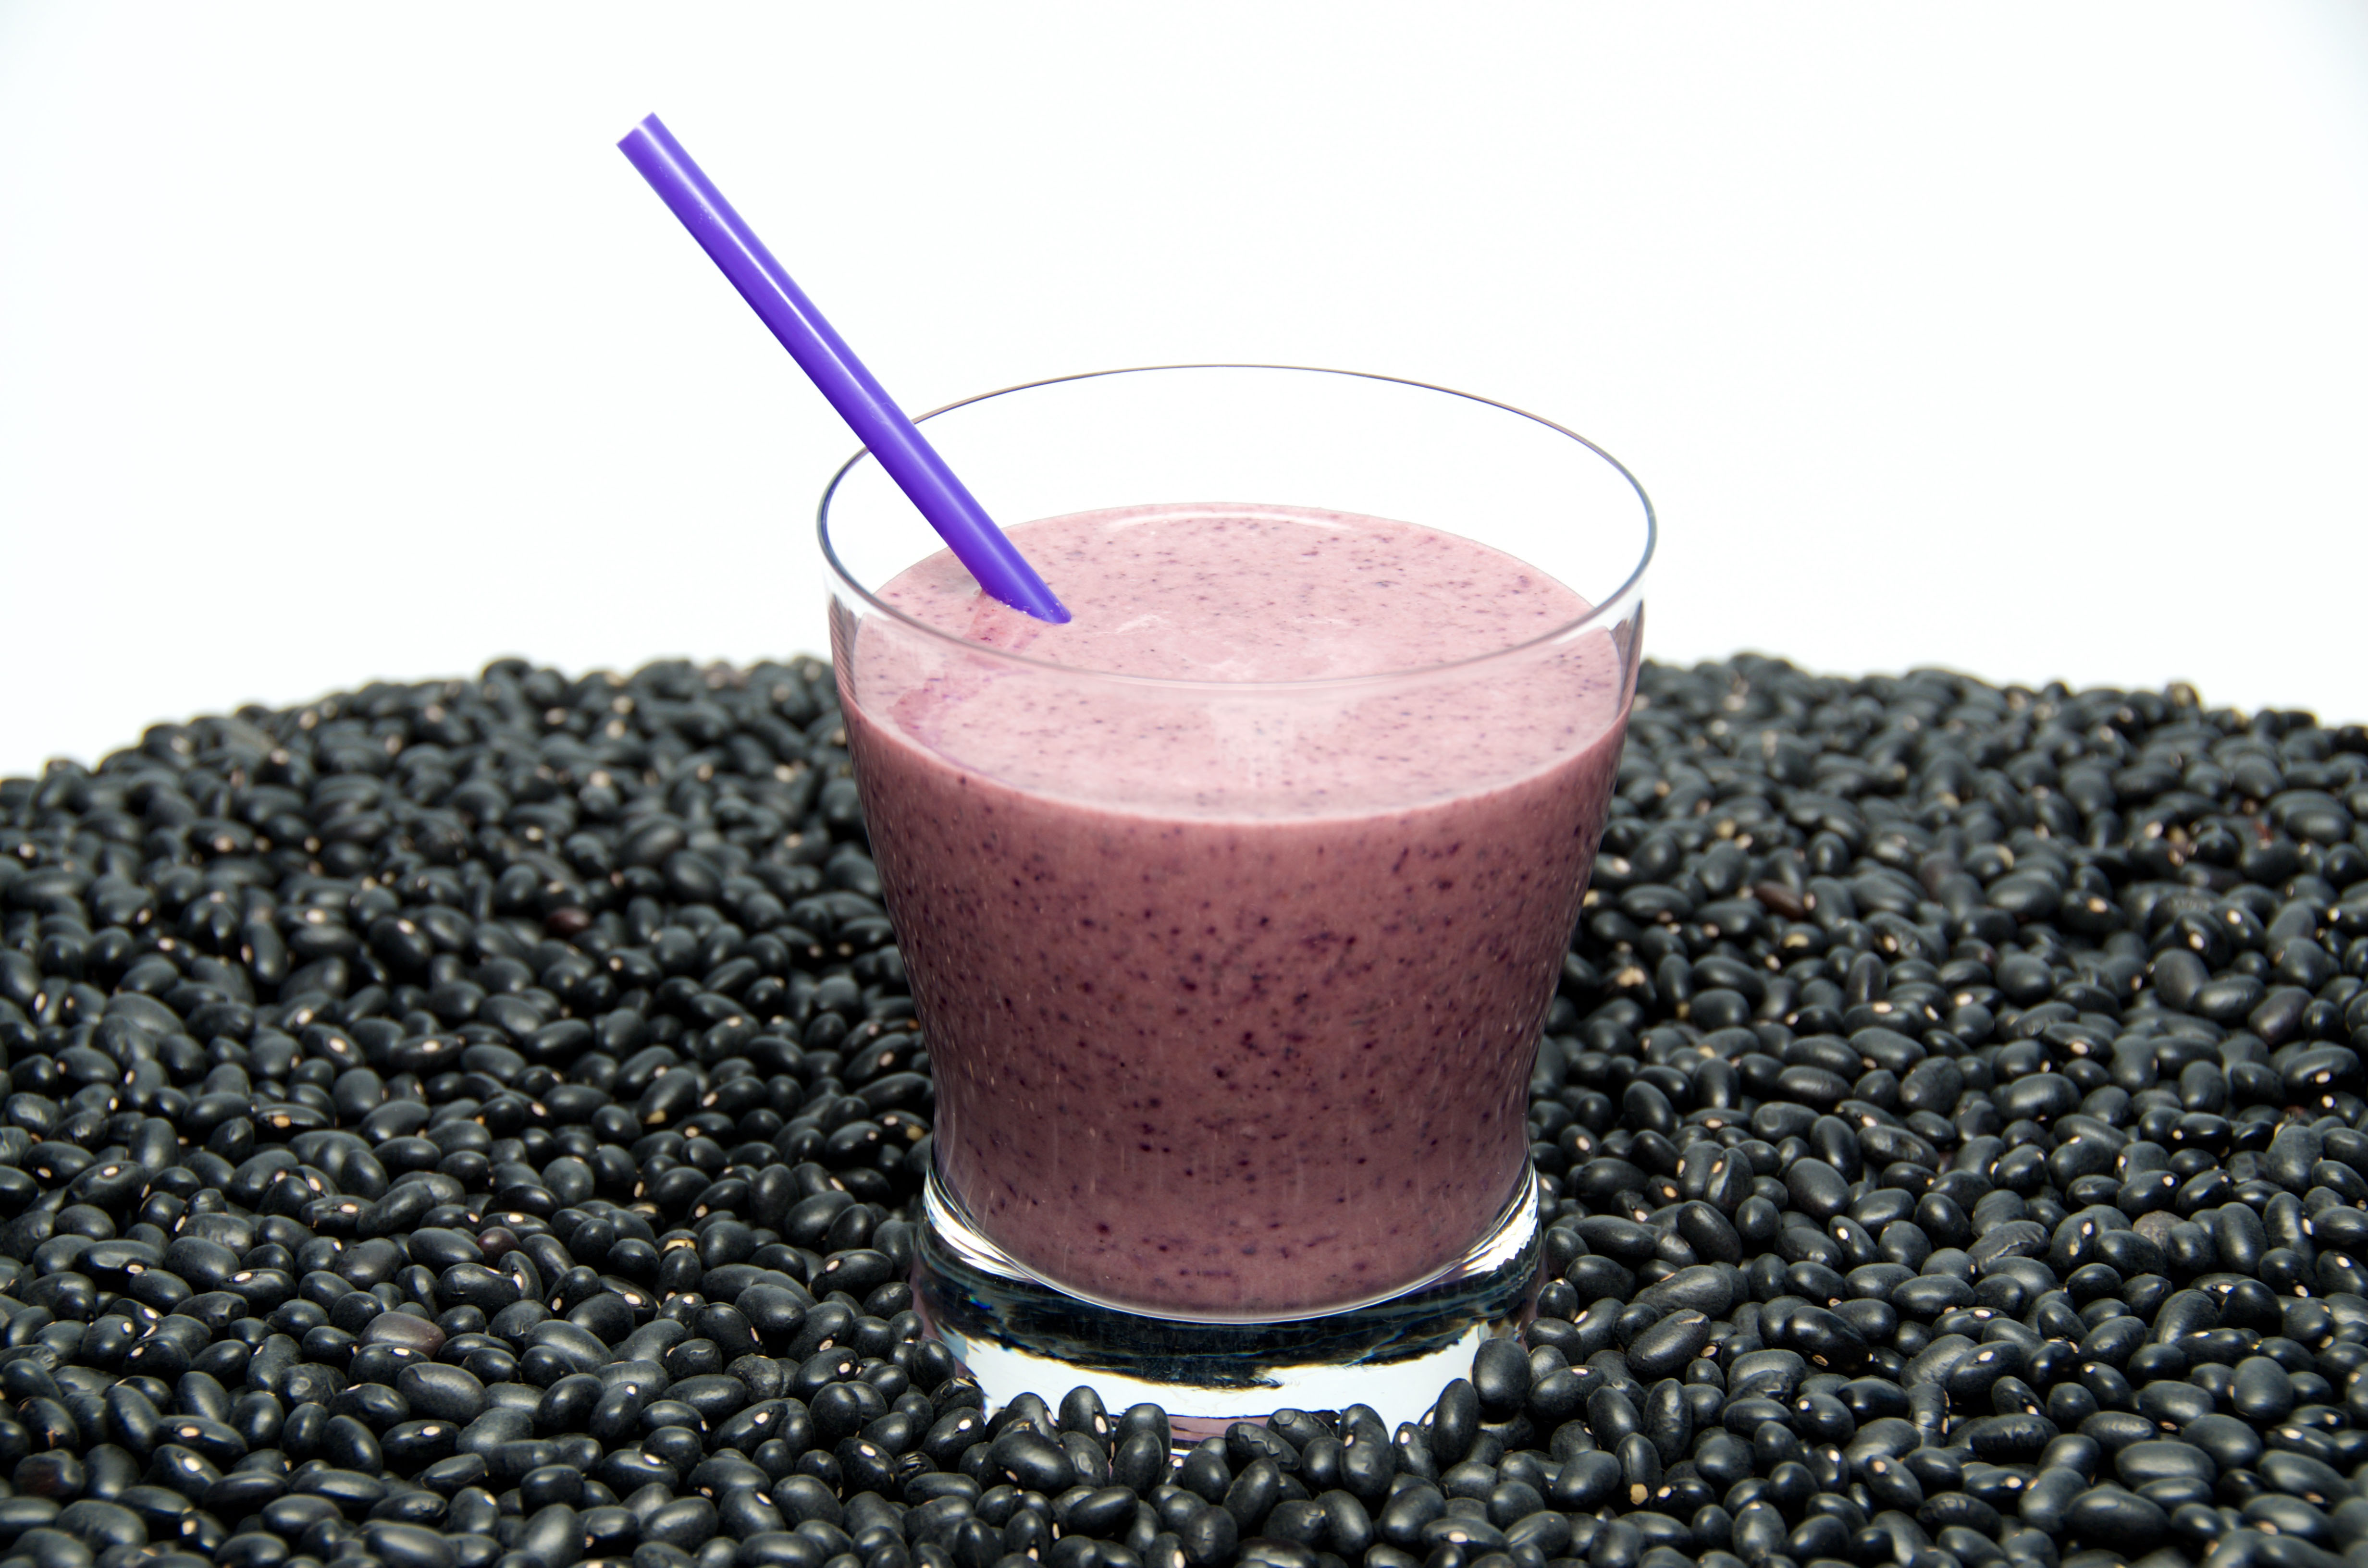 An image of the berry bean smoothie recipe brought to you by the Bean Institute!